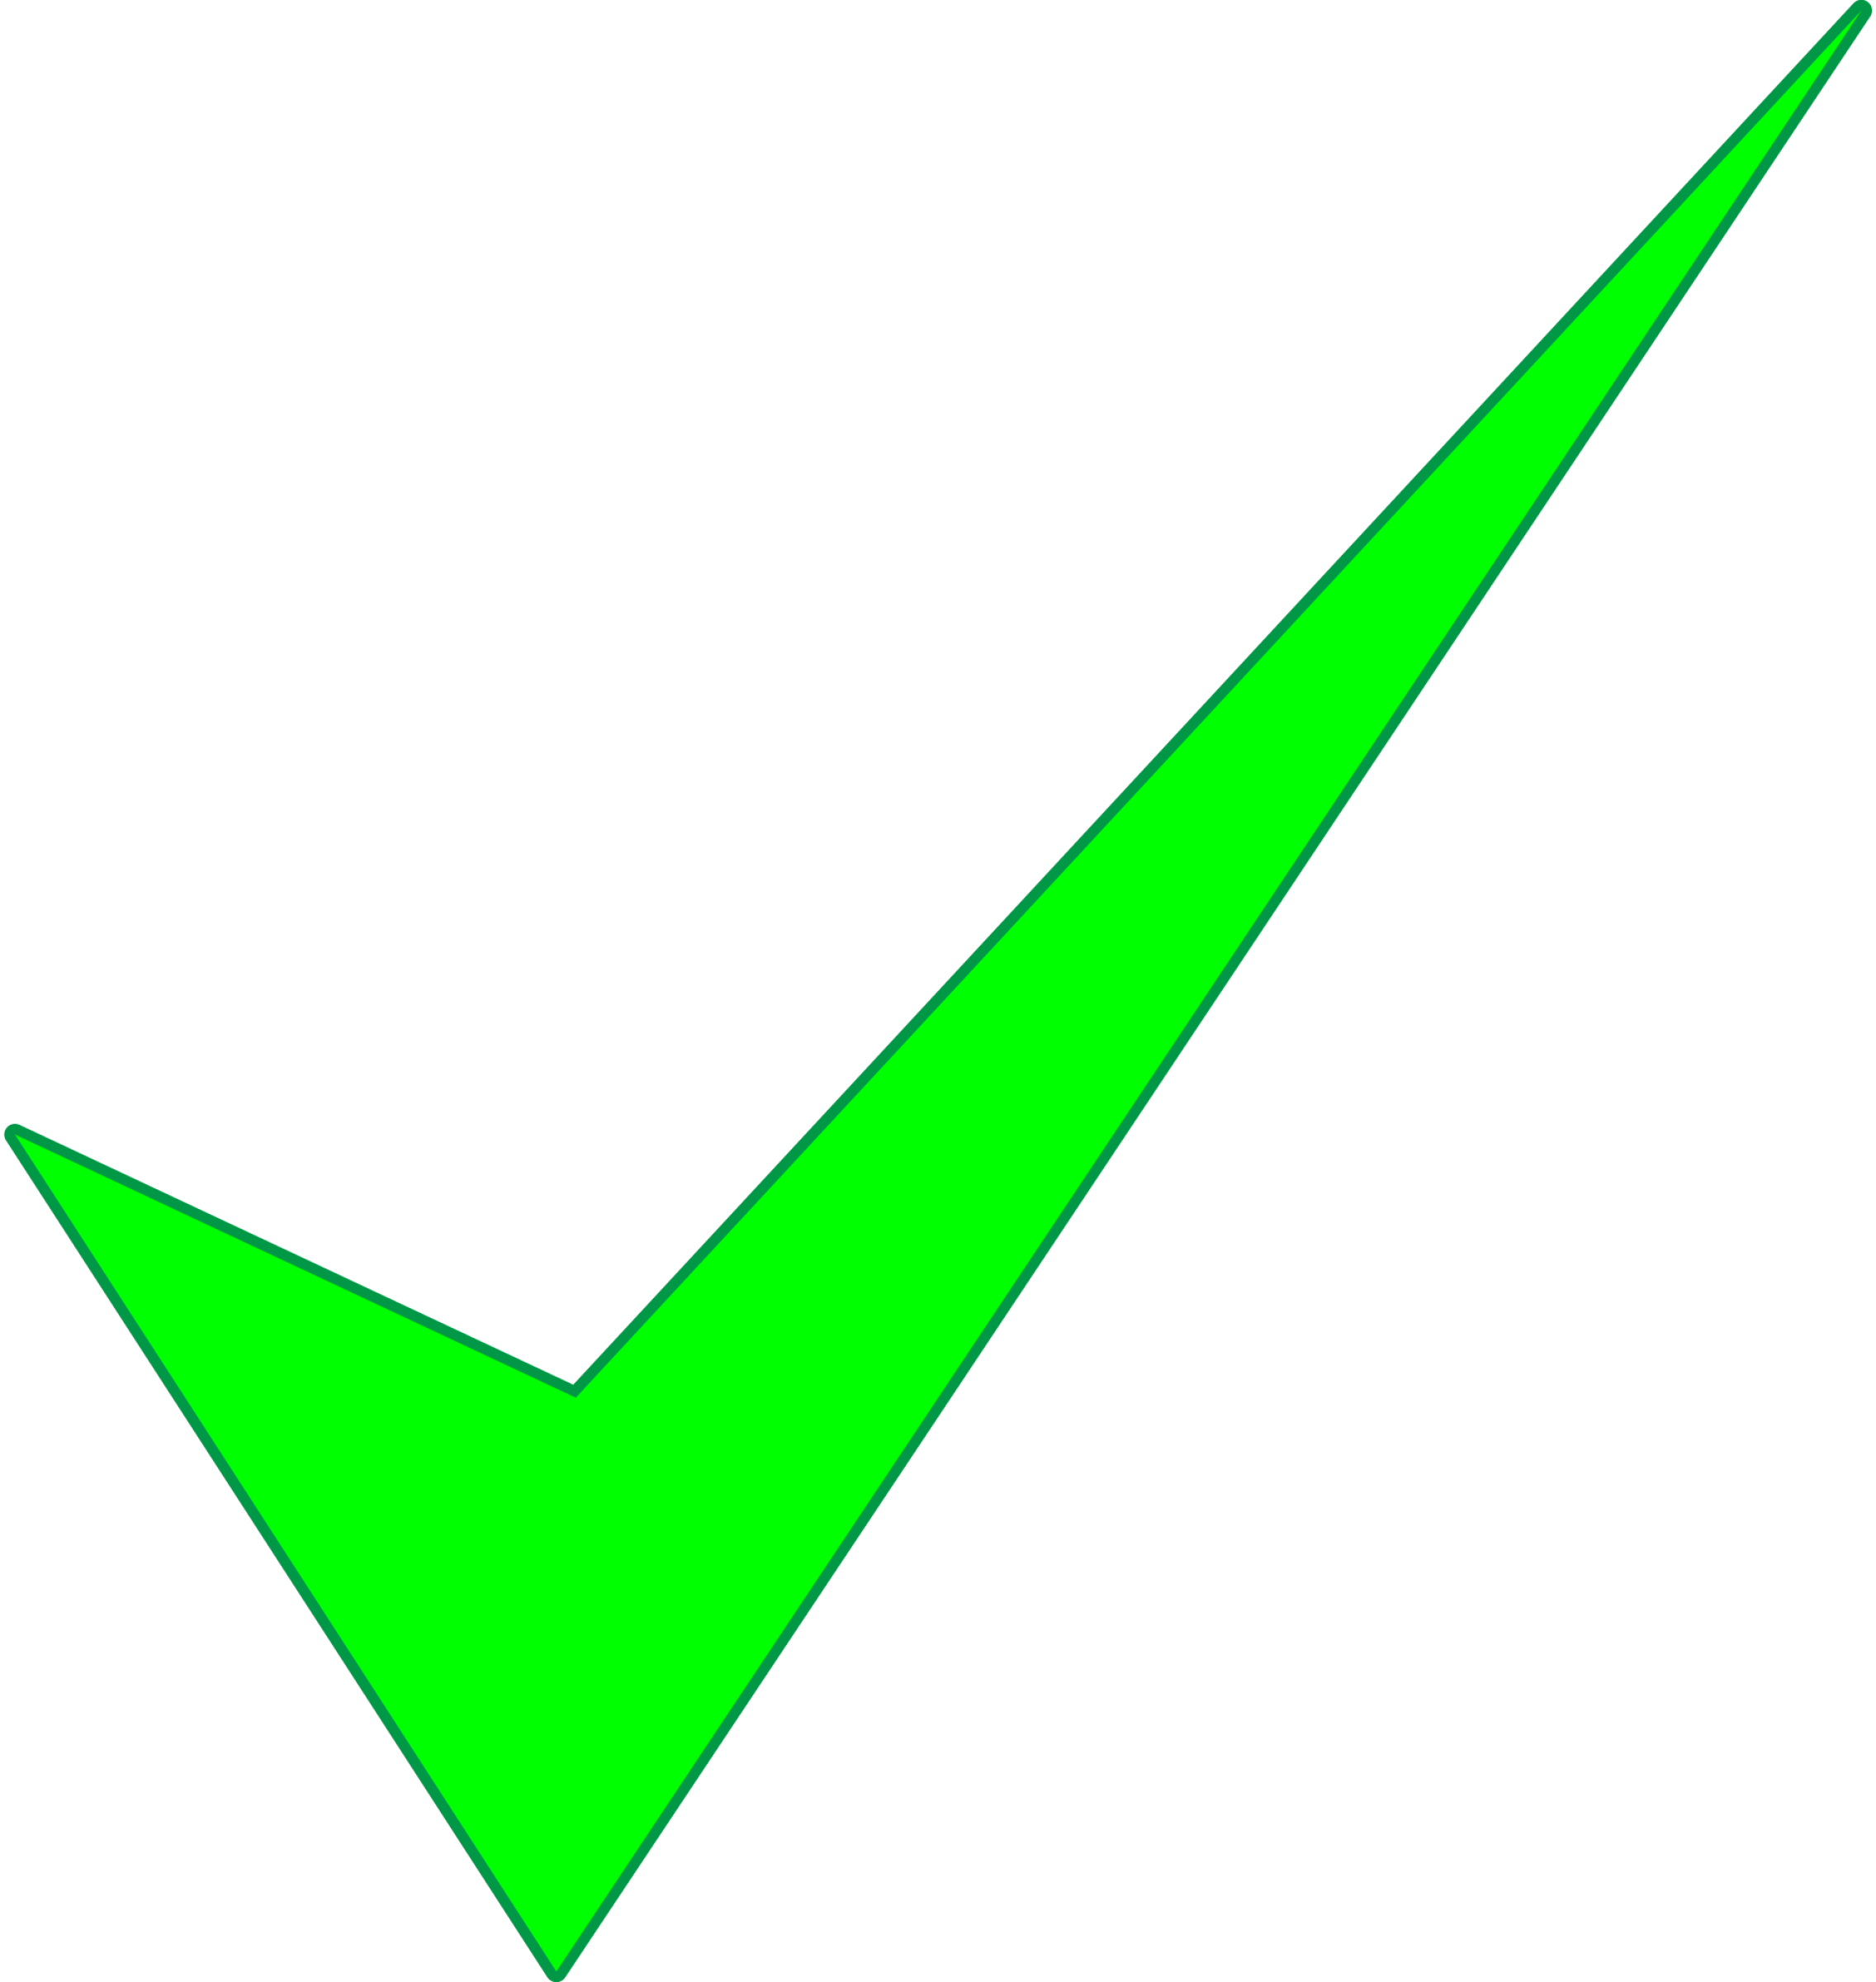 Green Check Mark PNG Image Background